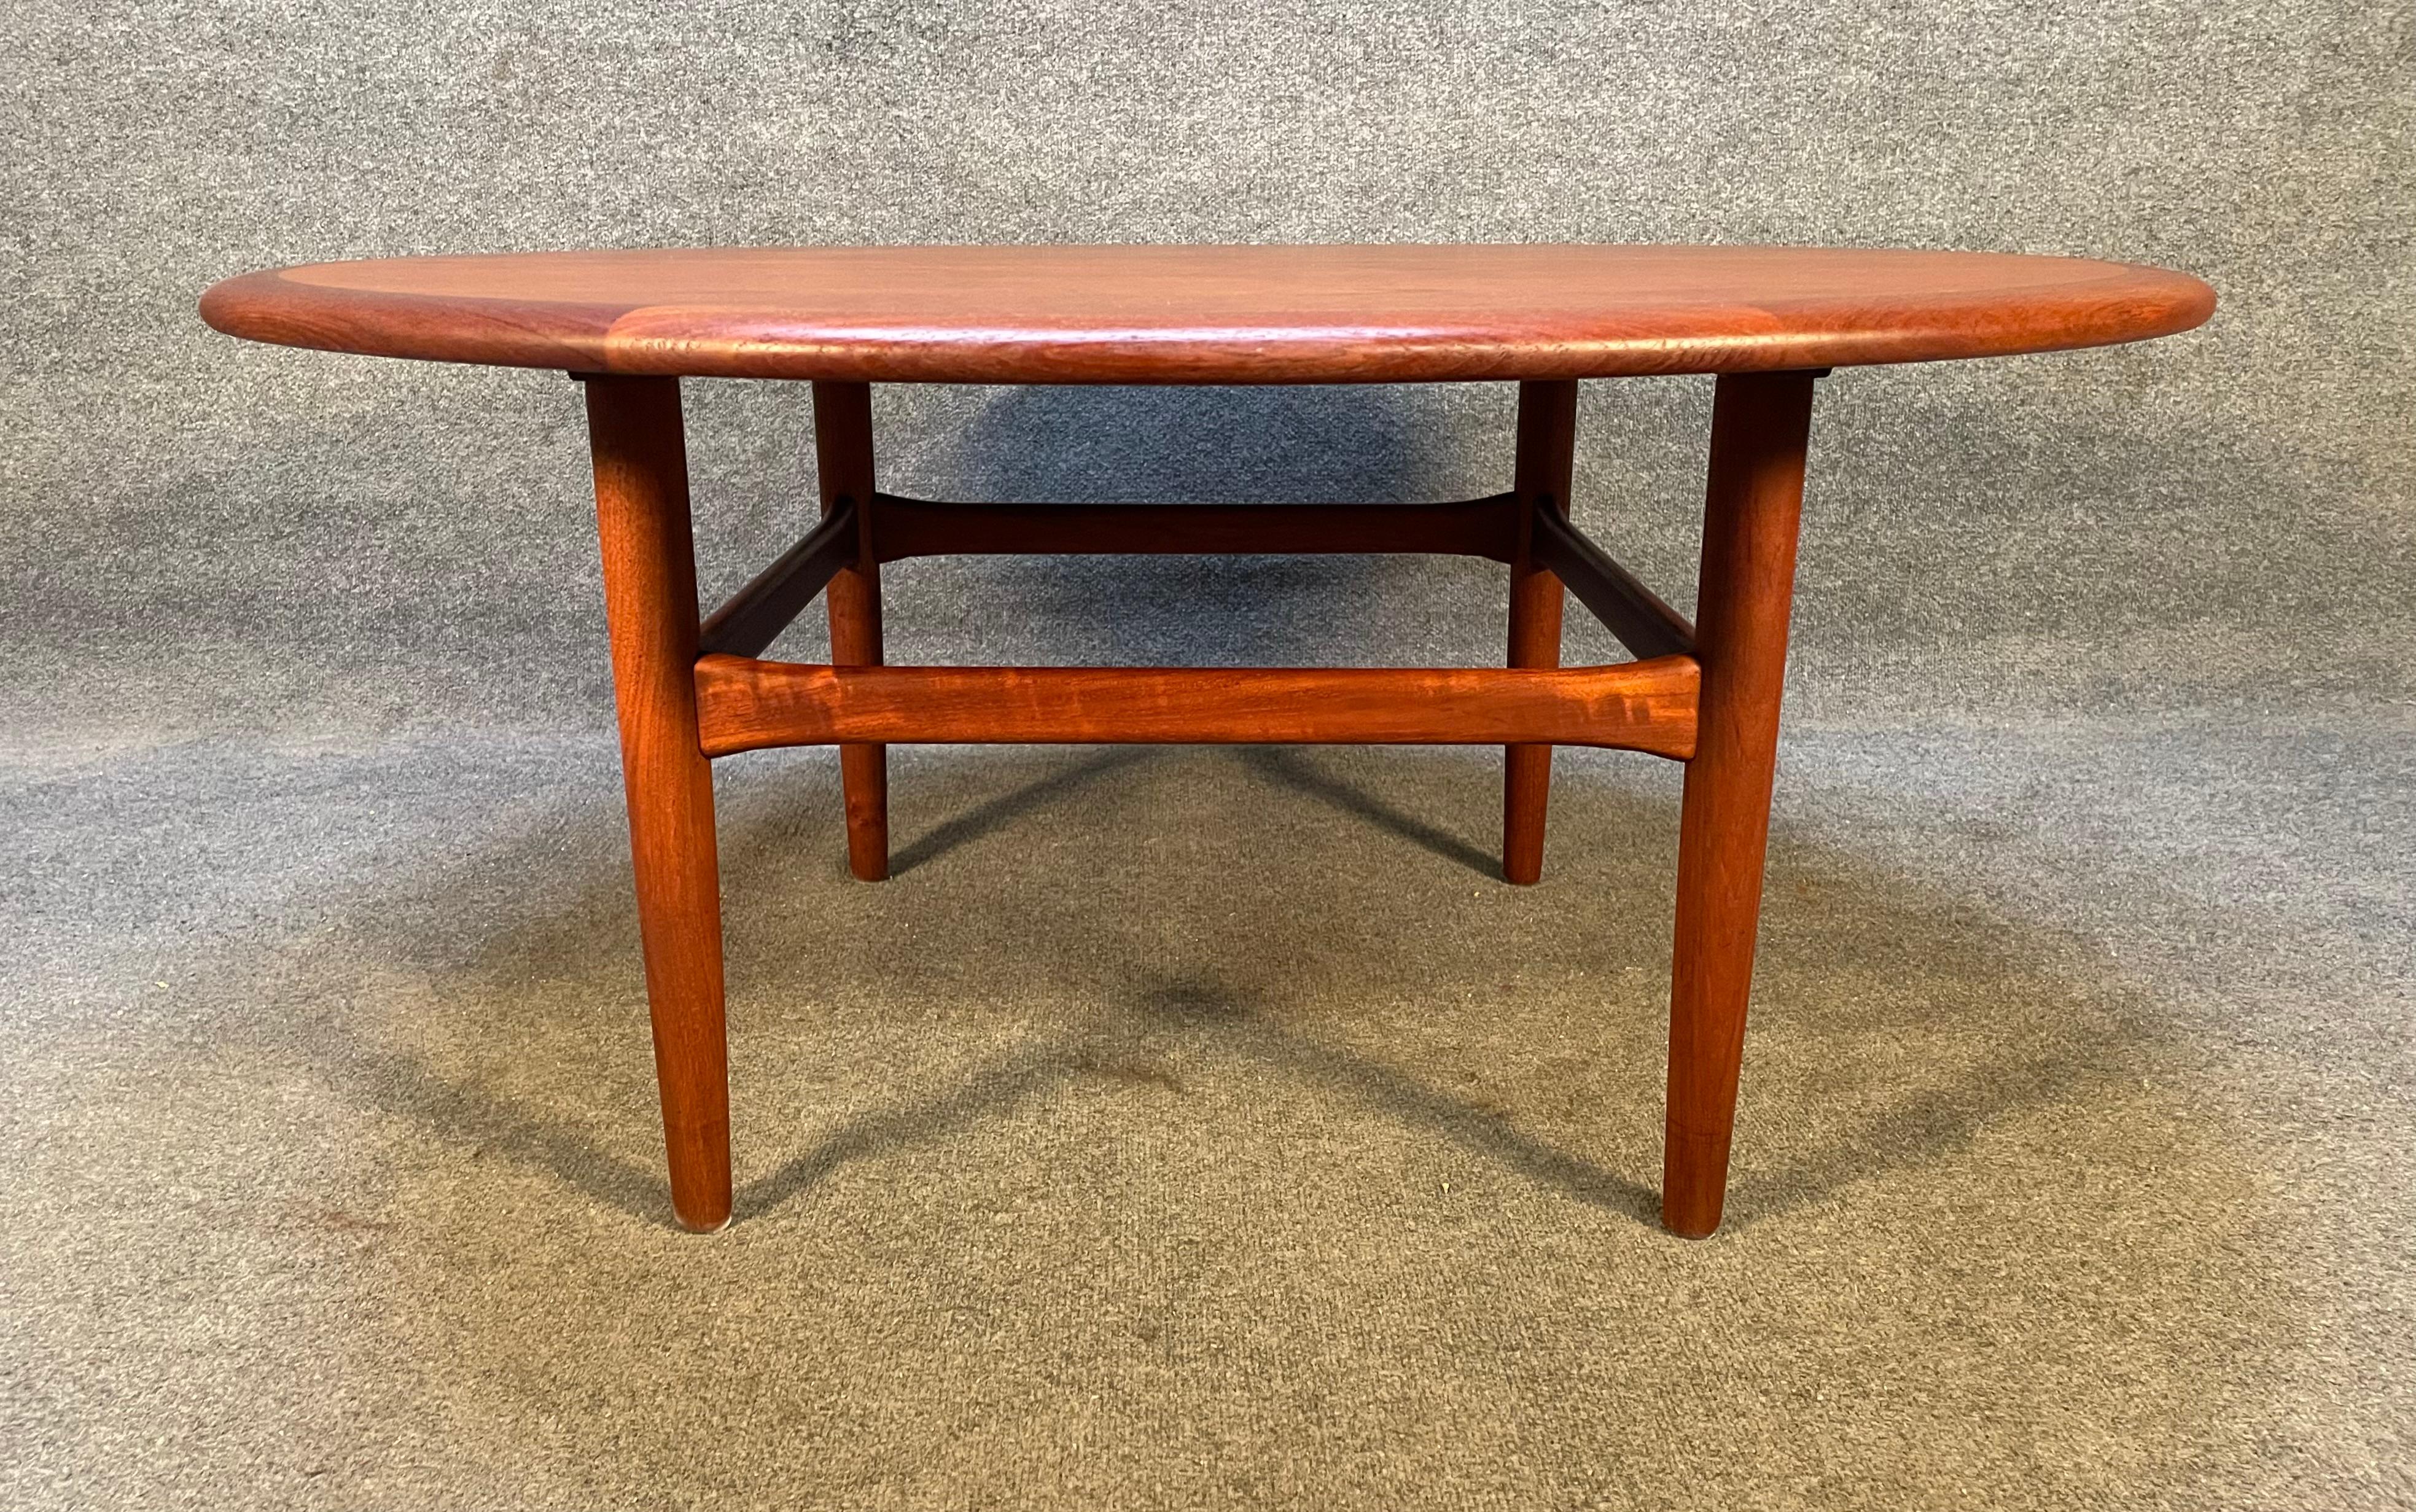 Here is a beautiful 1960's scandinavian modern cocktail table in teak wood recently imported from Europe to California before its refinishing.
This exquisite table features a table top showing vibrant wood grain + four tapered legs with